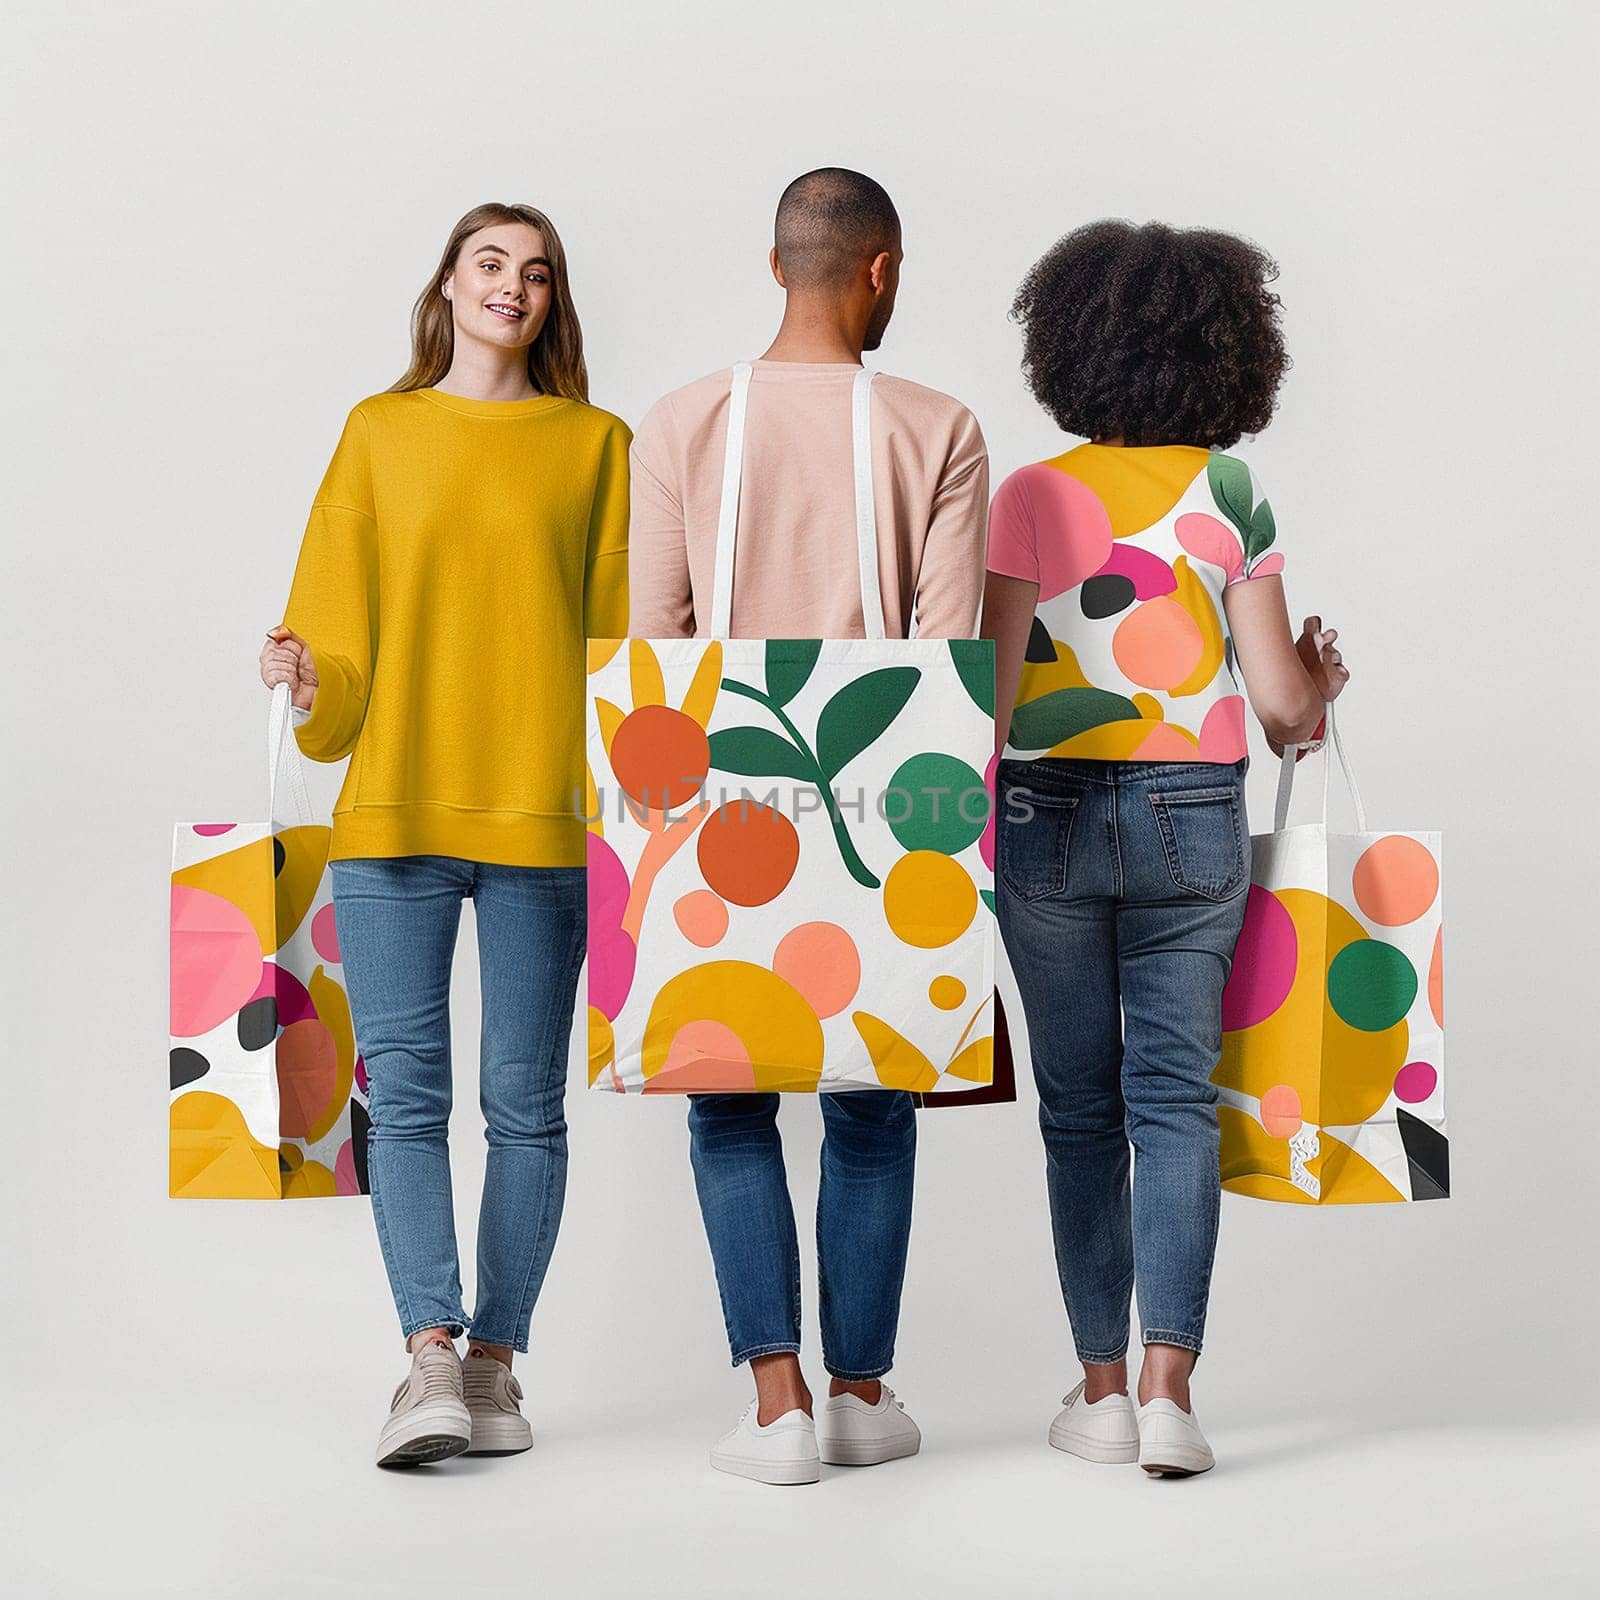 A group of friends shopping. Professional photo. High quality illustration